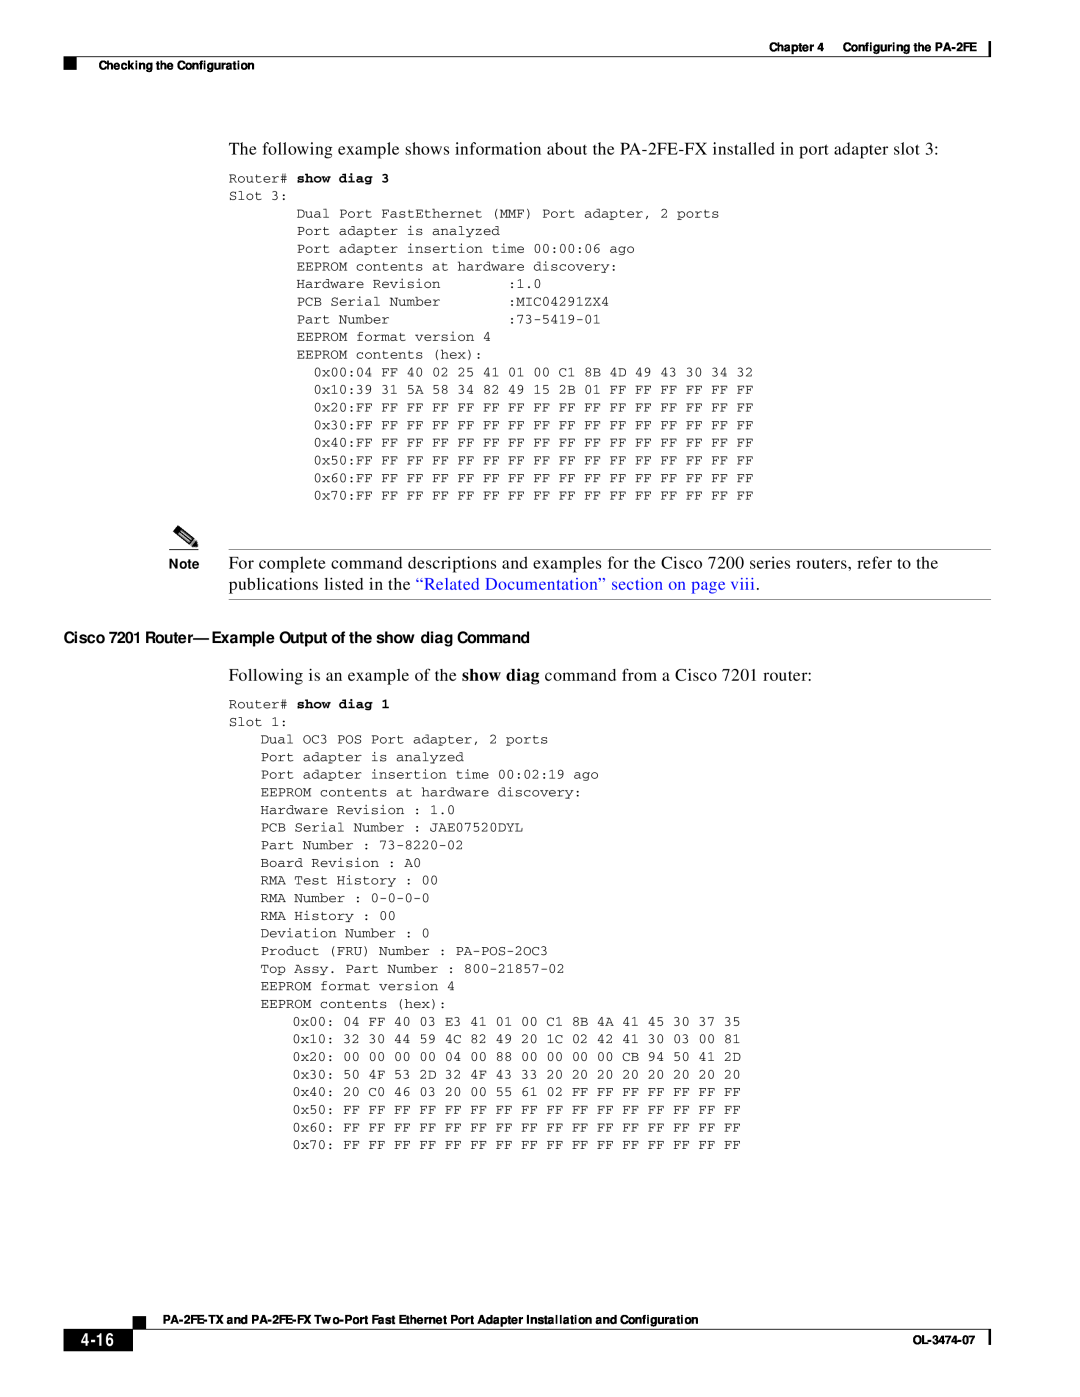 Cisco Systems PA-2FE-TX, PA-2FE-FX manual Cisco 7201 Router-Example Output of the show diag Command, 4-16 